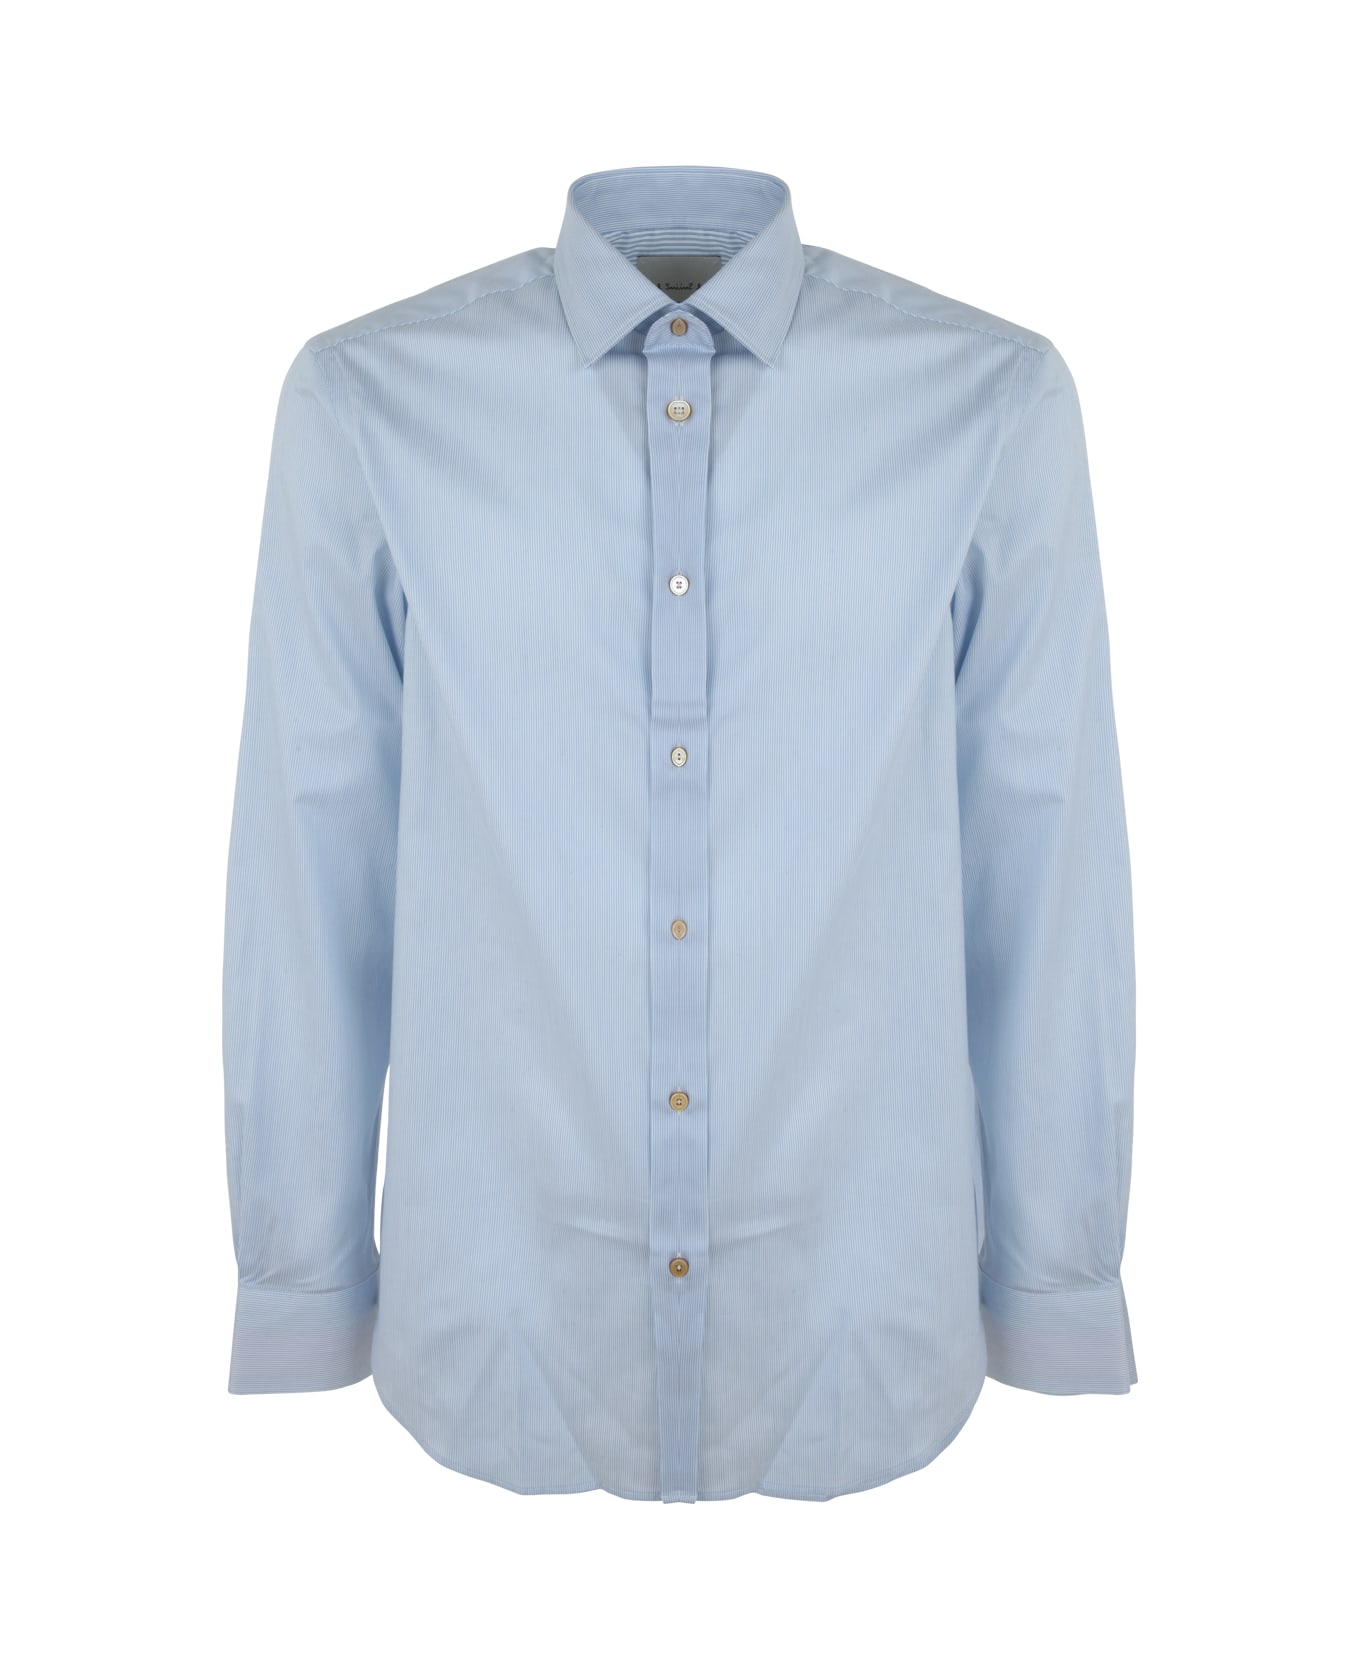 Paul Smith Mens Tailored Fit Shirt - Blue